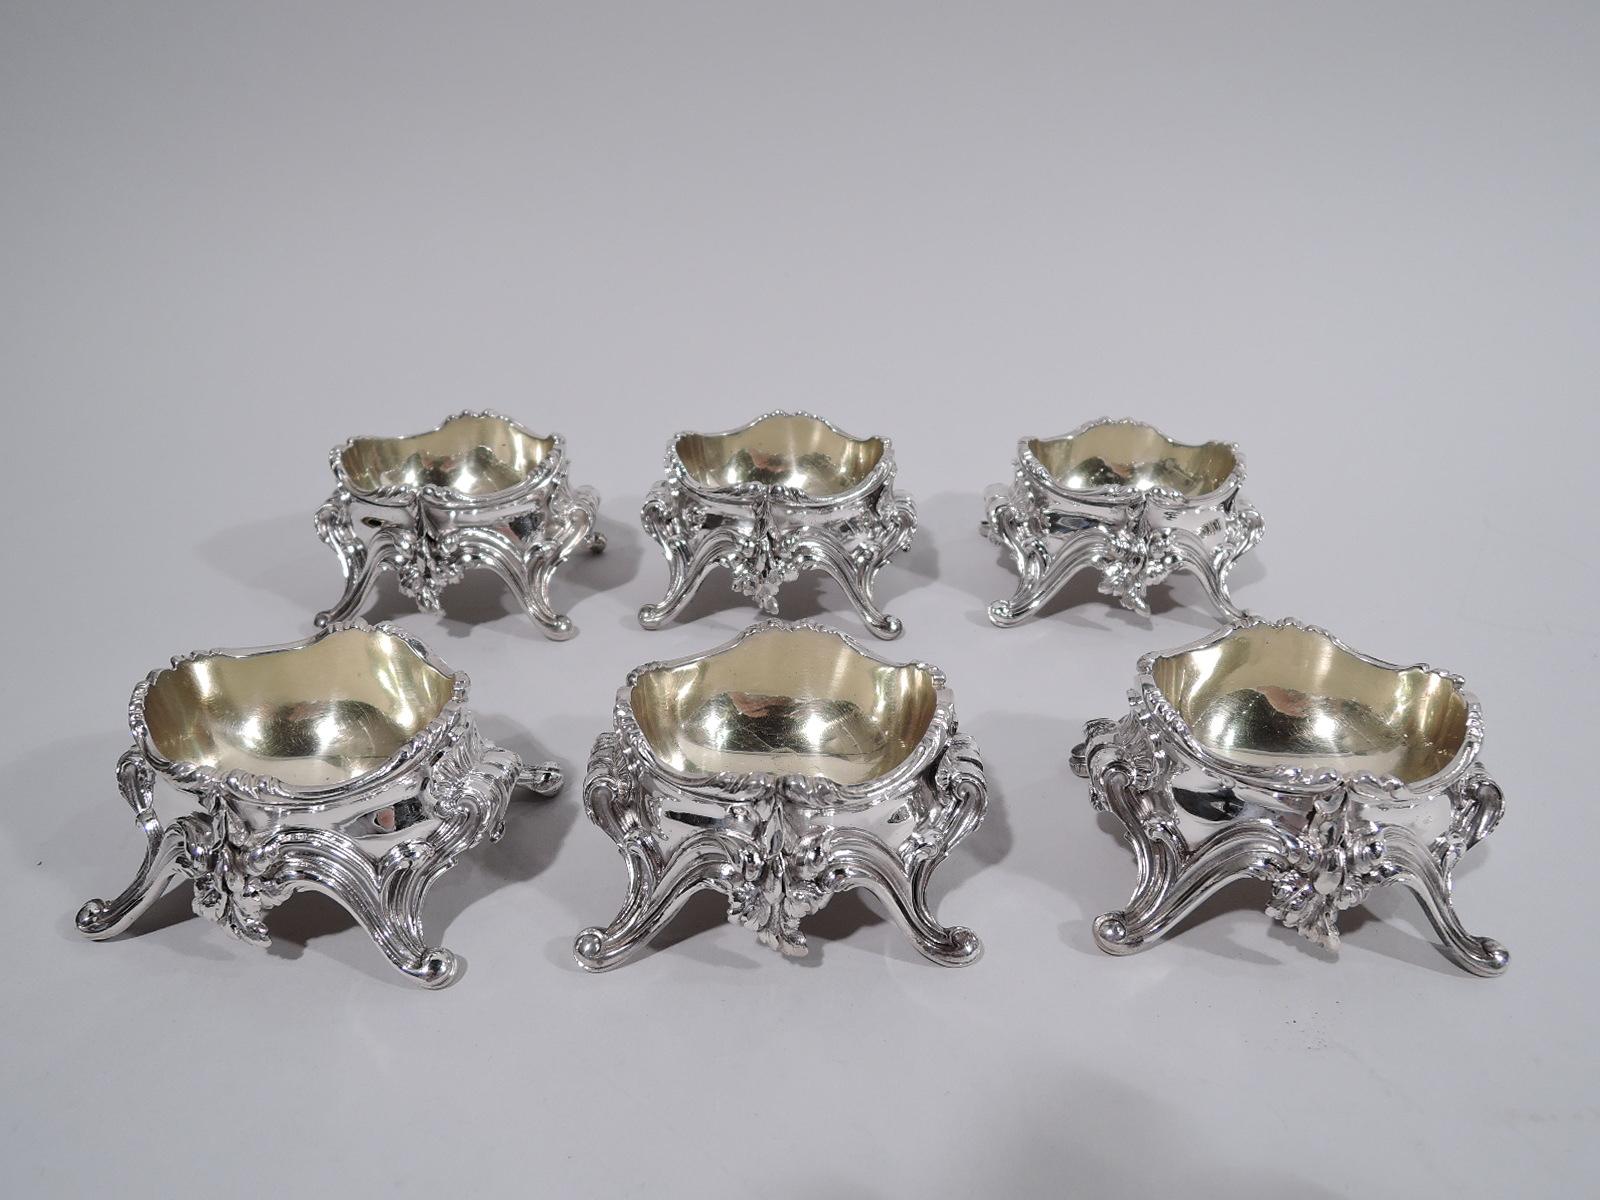 Set of 6 Rococo 950 silver open salts. Made by Boin-Taburet in Paris, ca 1890. Each: Oval gilt-washed bowl on 4 splayed volute-scroll supports. Ends also volute-scrolled with scallop shell mounts. Sides have foliate aprons. Sumptuous and sculptural